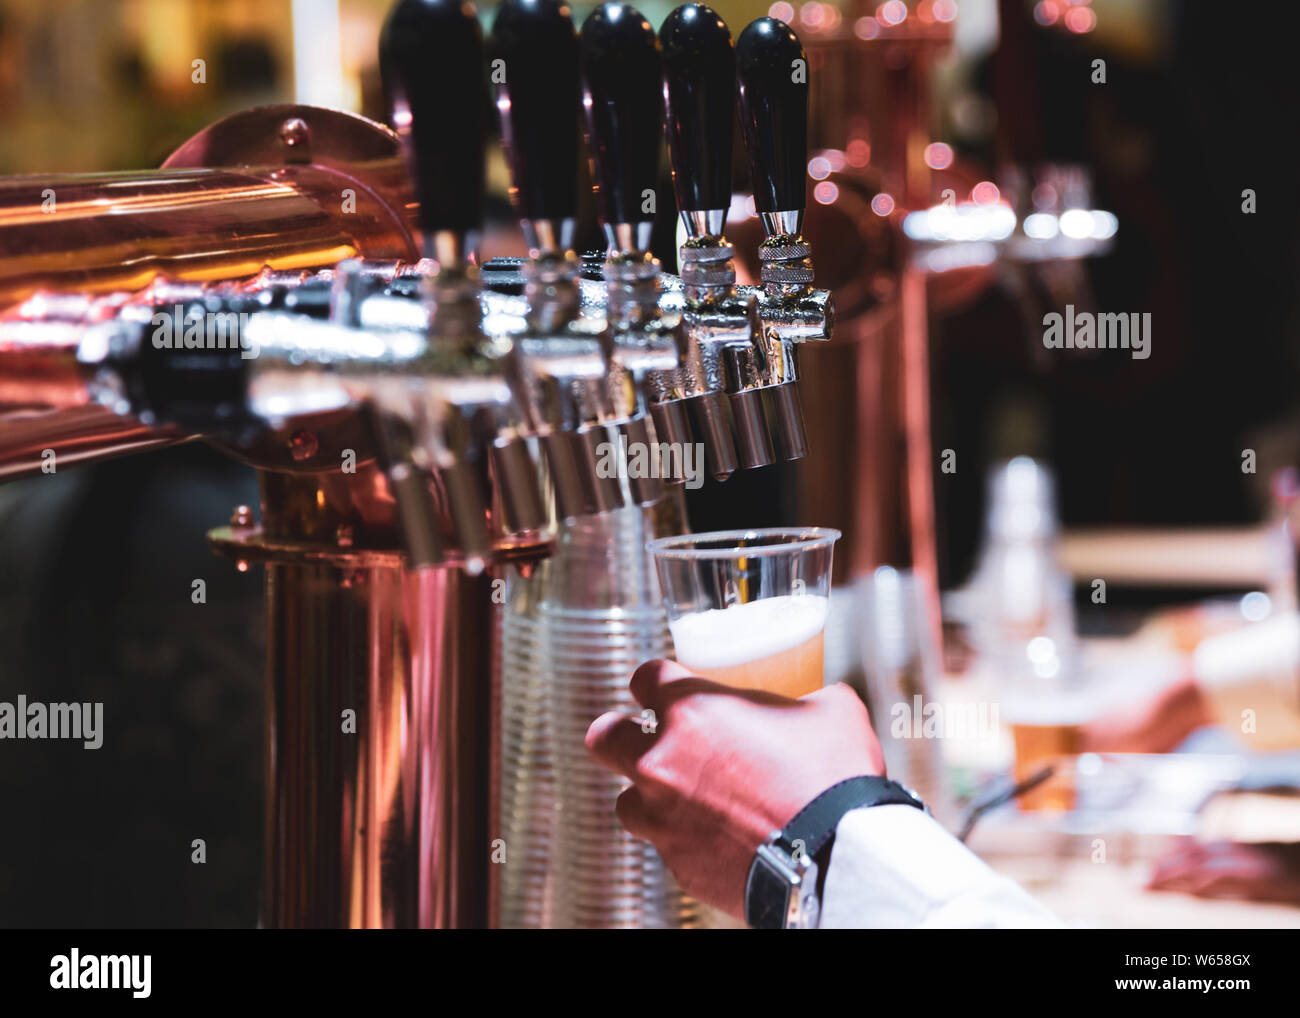 Bartender pouring draft beer in the bar, Barman hand at beer tap pouring draught lager beer serving in a restaurant or pub Stock Photo